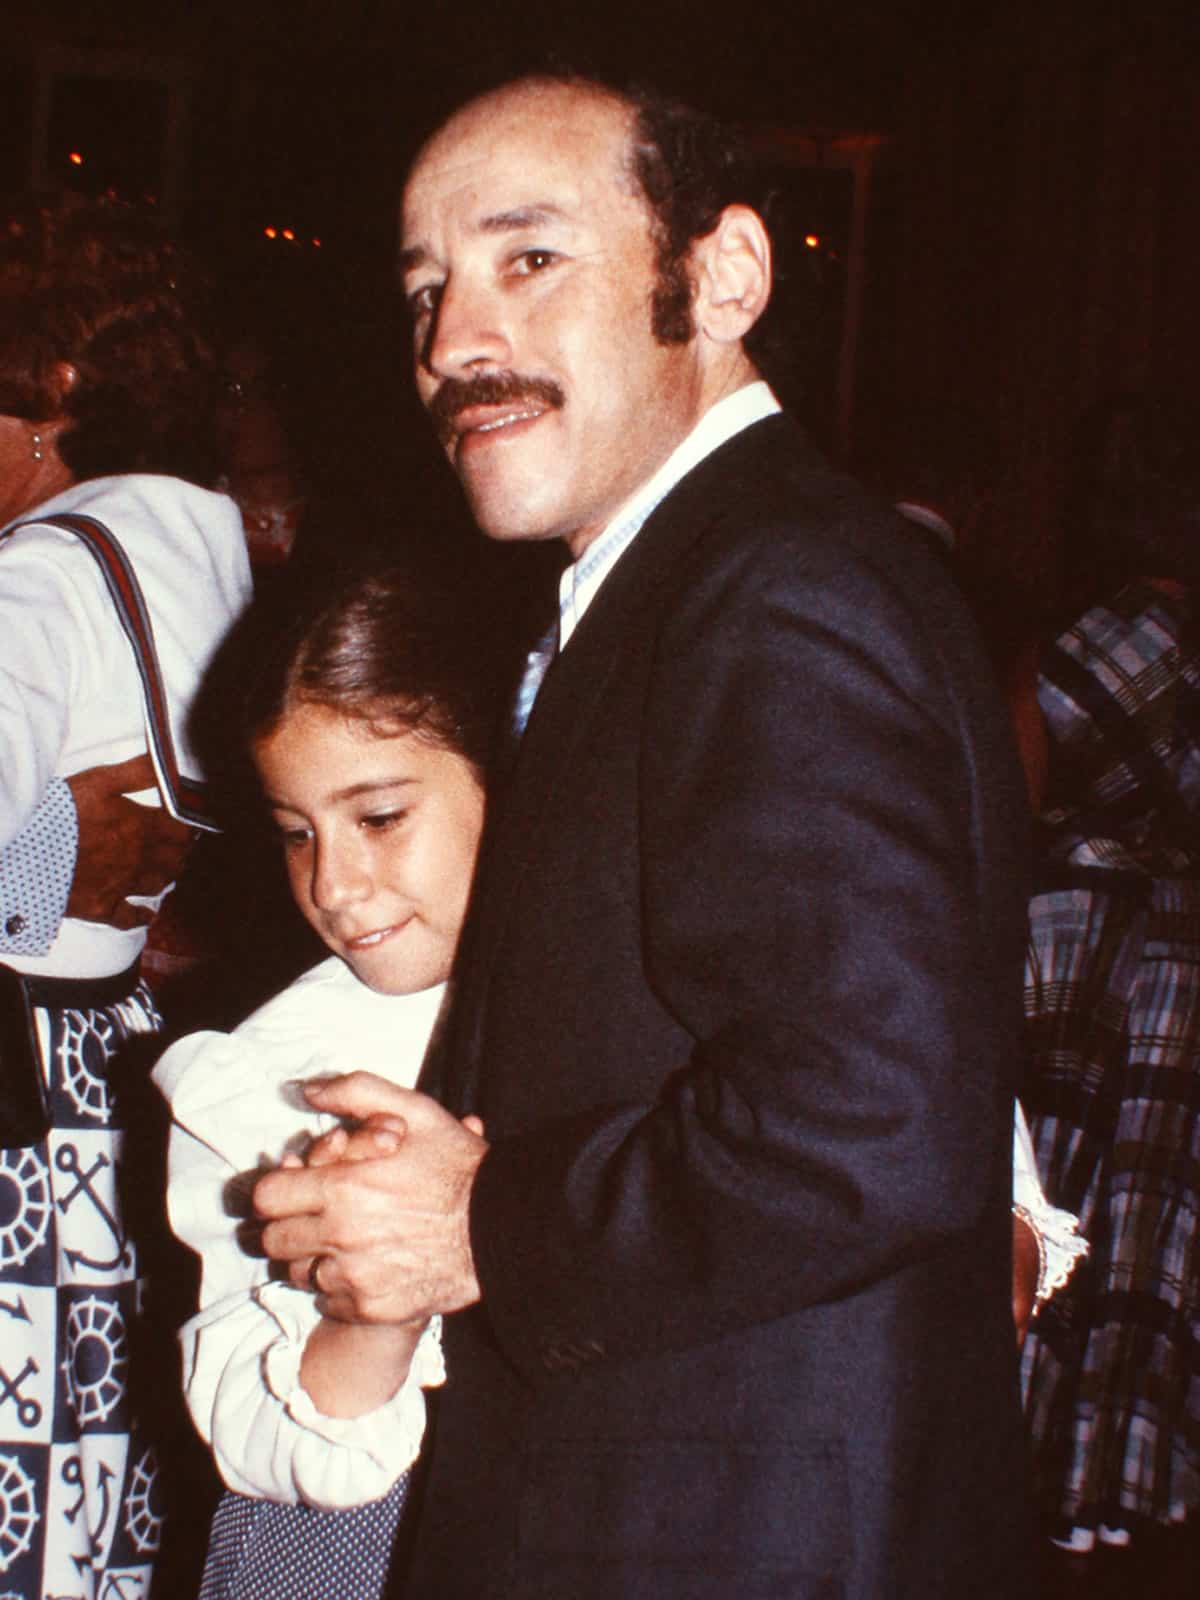 Beth Lee and her dad dancing at a celebration when Beth was a young girl.